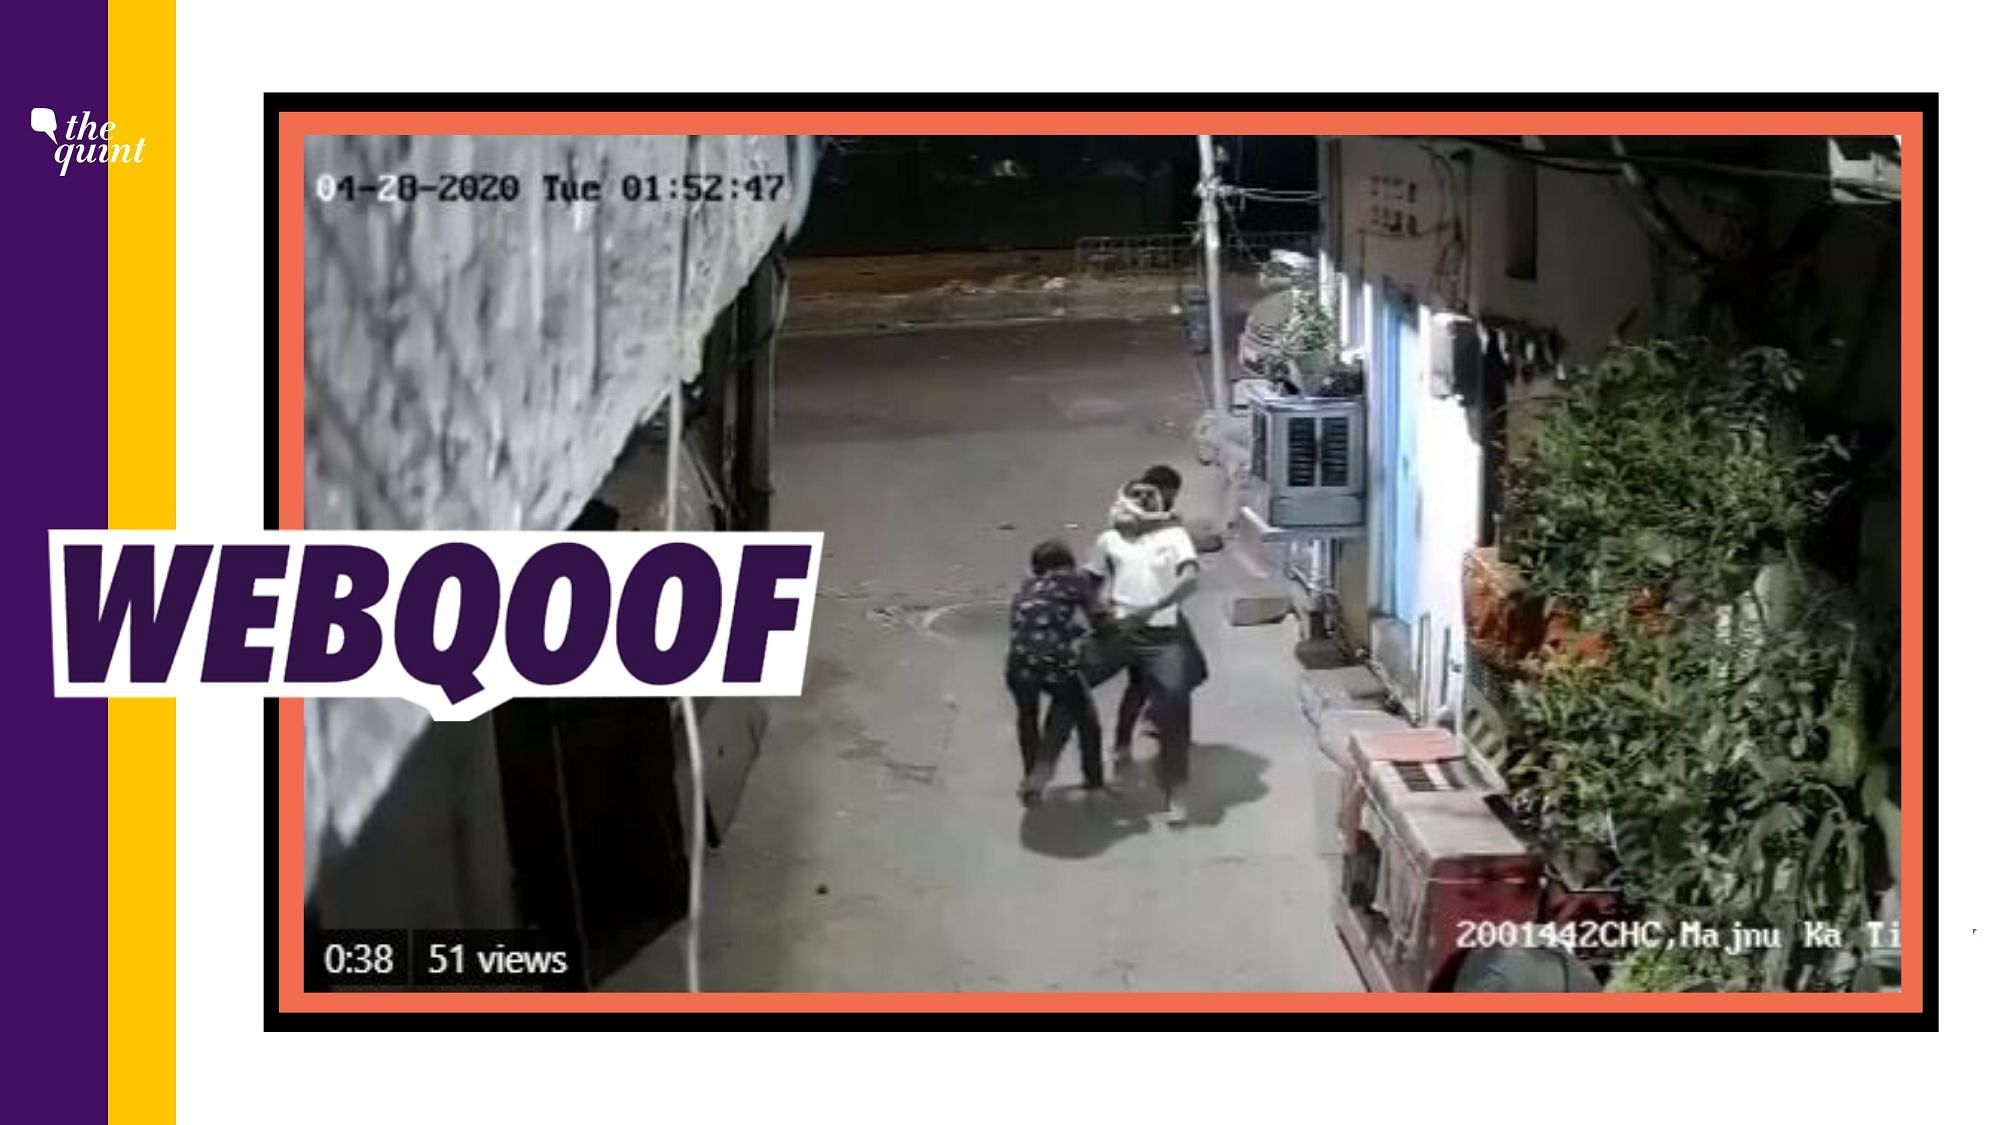 A video from Delhi’s Majnu Ka Tilla area is being shared on social media with a claim that it shows migrant labourers indulging in robbery because of financial distress.